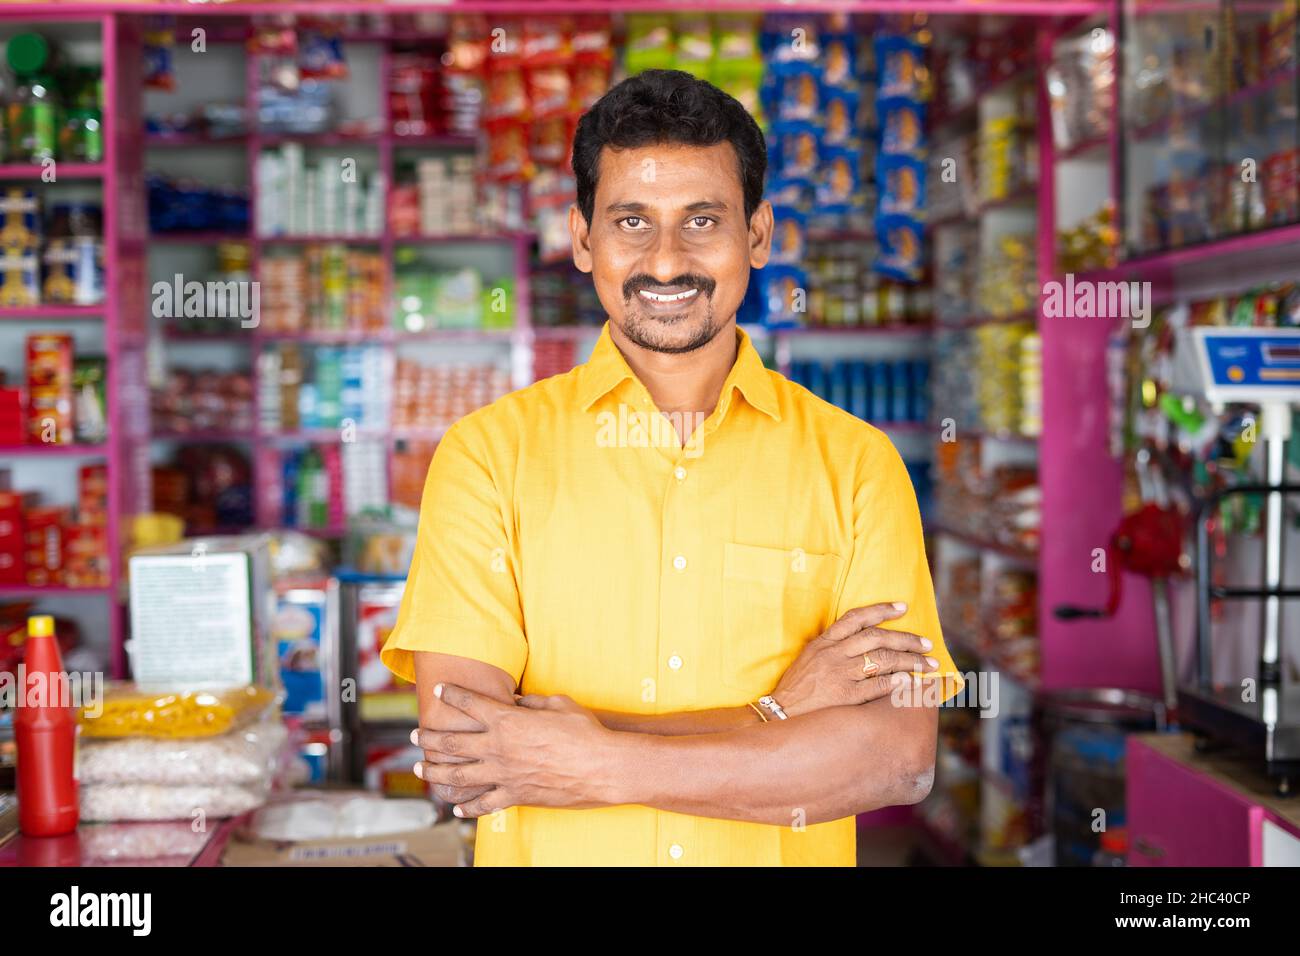 Portrait Of Successful Indian Kirana Or Groceries Businessman Standing Confidently With Smile By Looking At Camera Concept Of Small Business 2HC40CP 